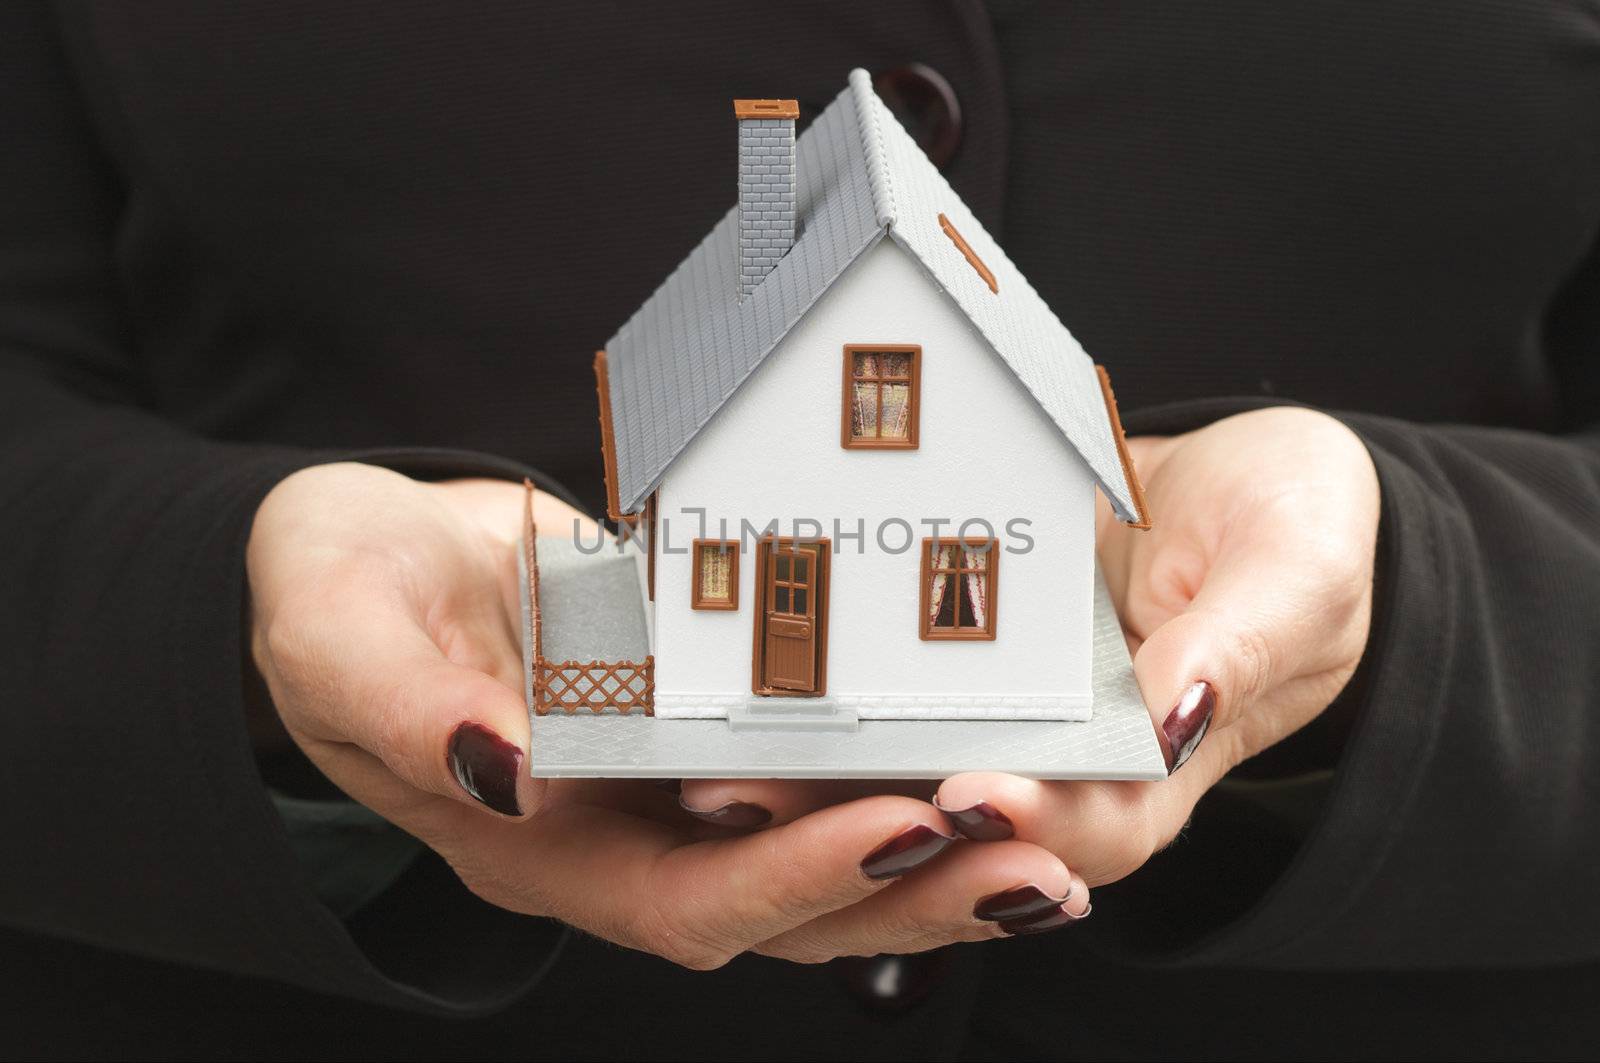 Female hands holding small house.